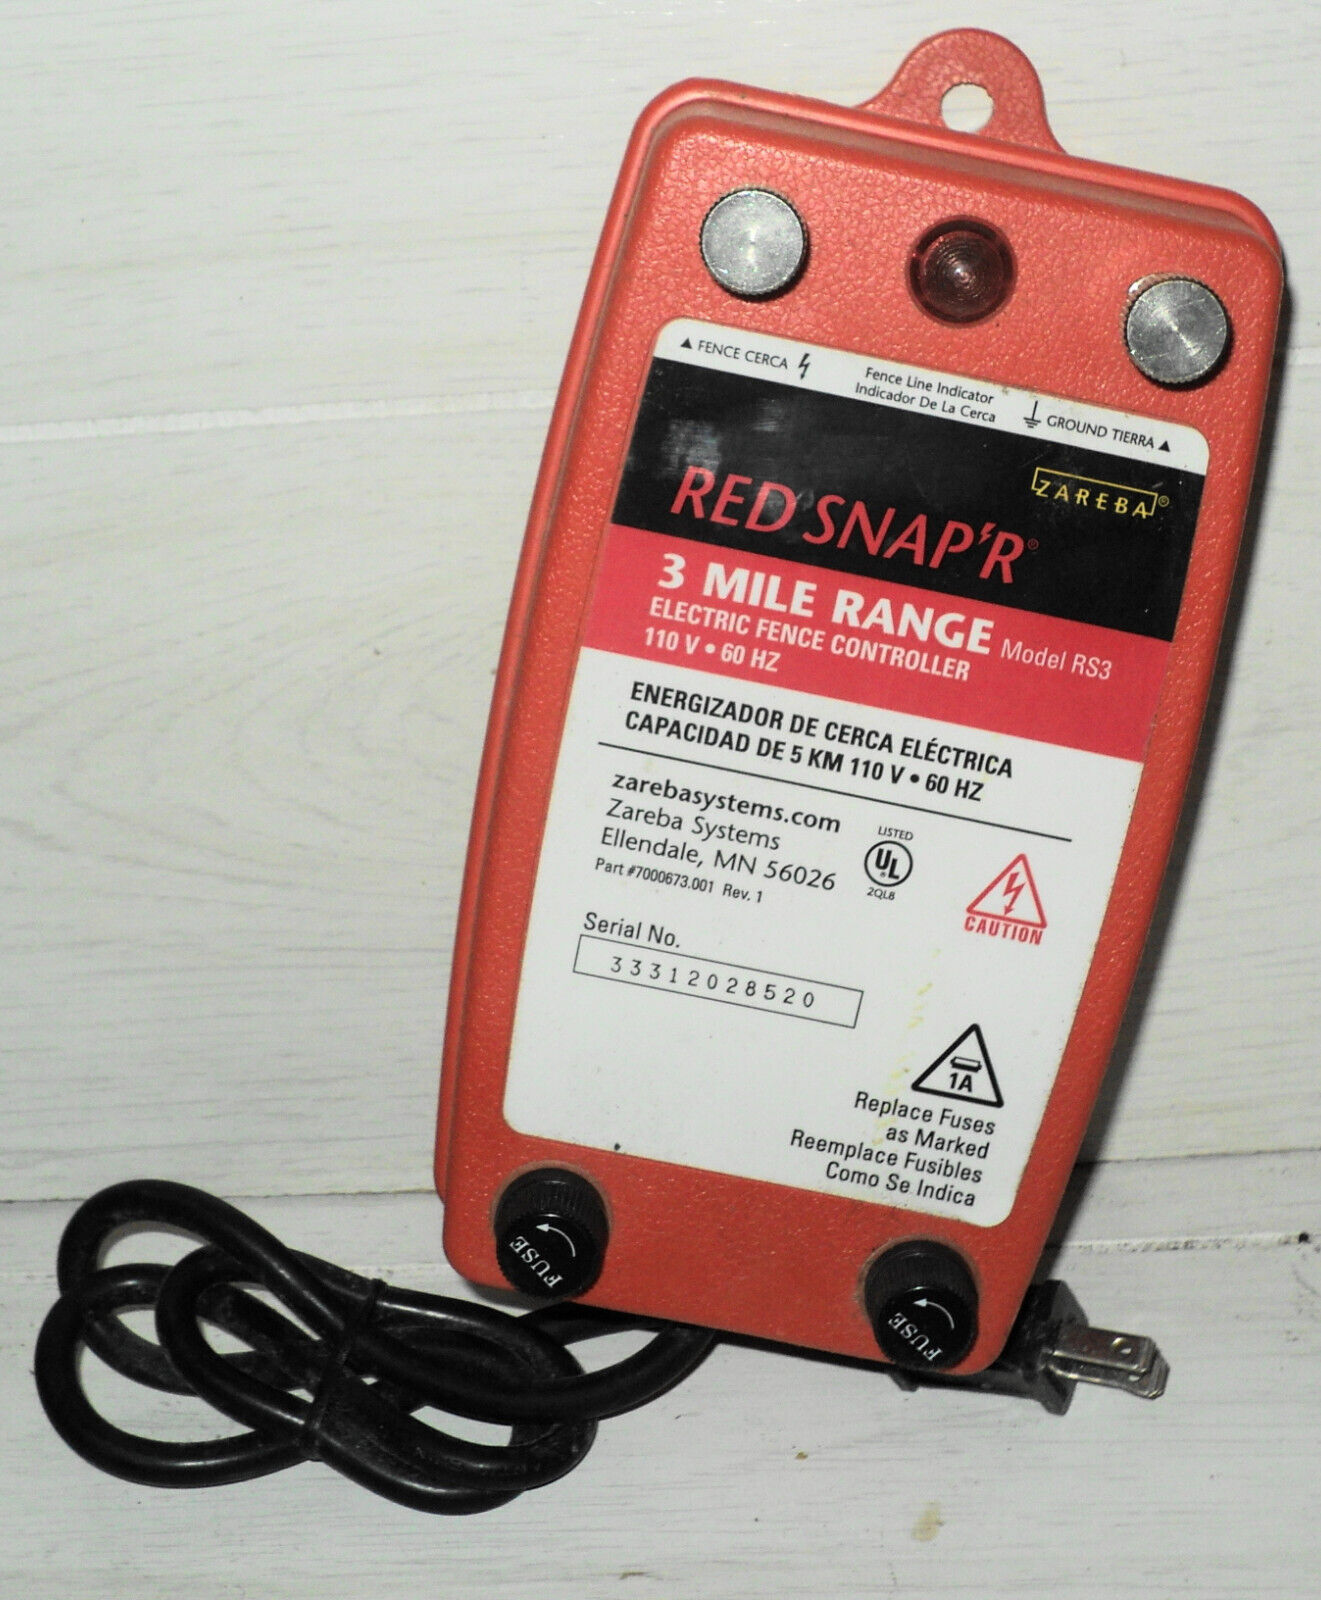 Red Snap'r Electric 3 Mile Range Fence Controller Model Rs3 Zereba